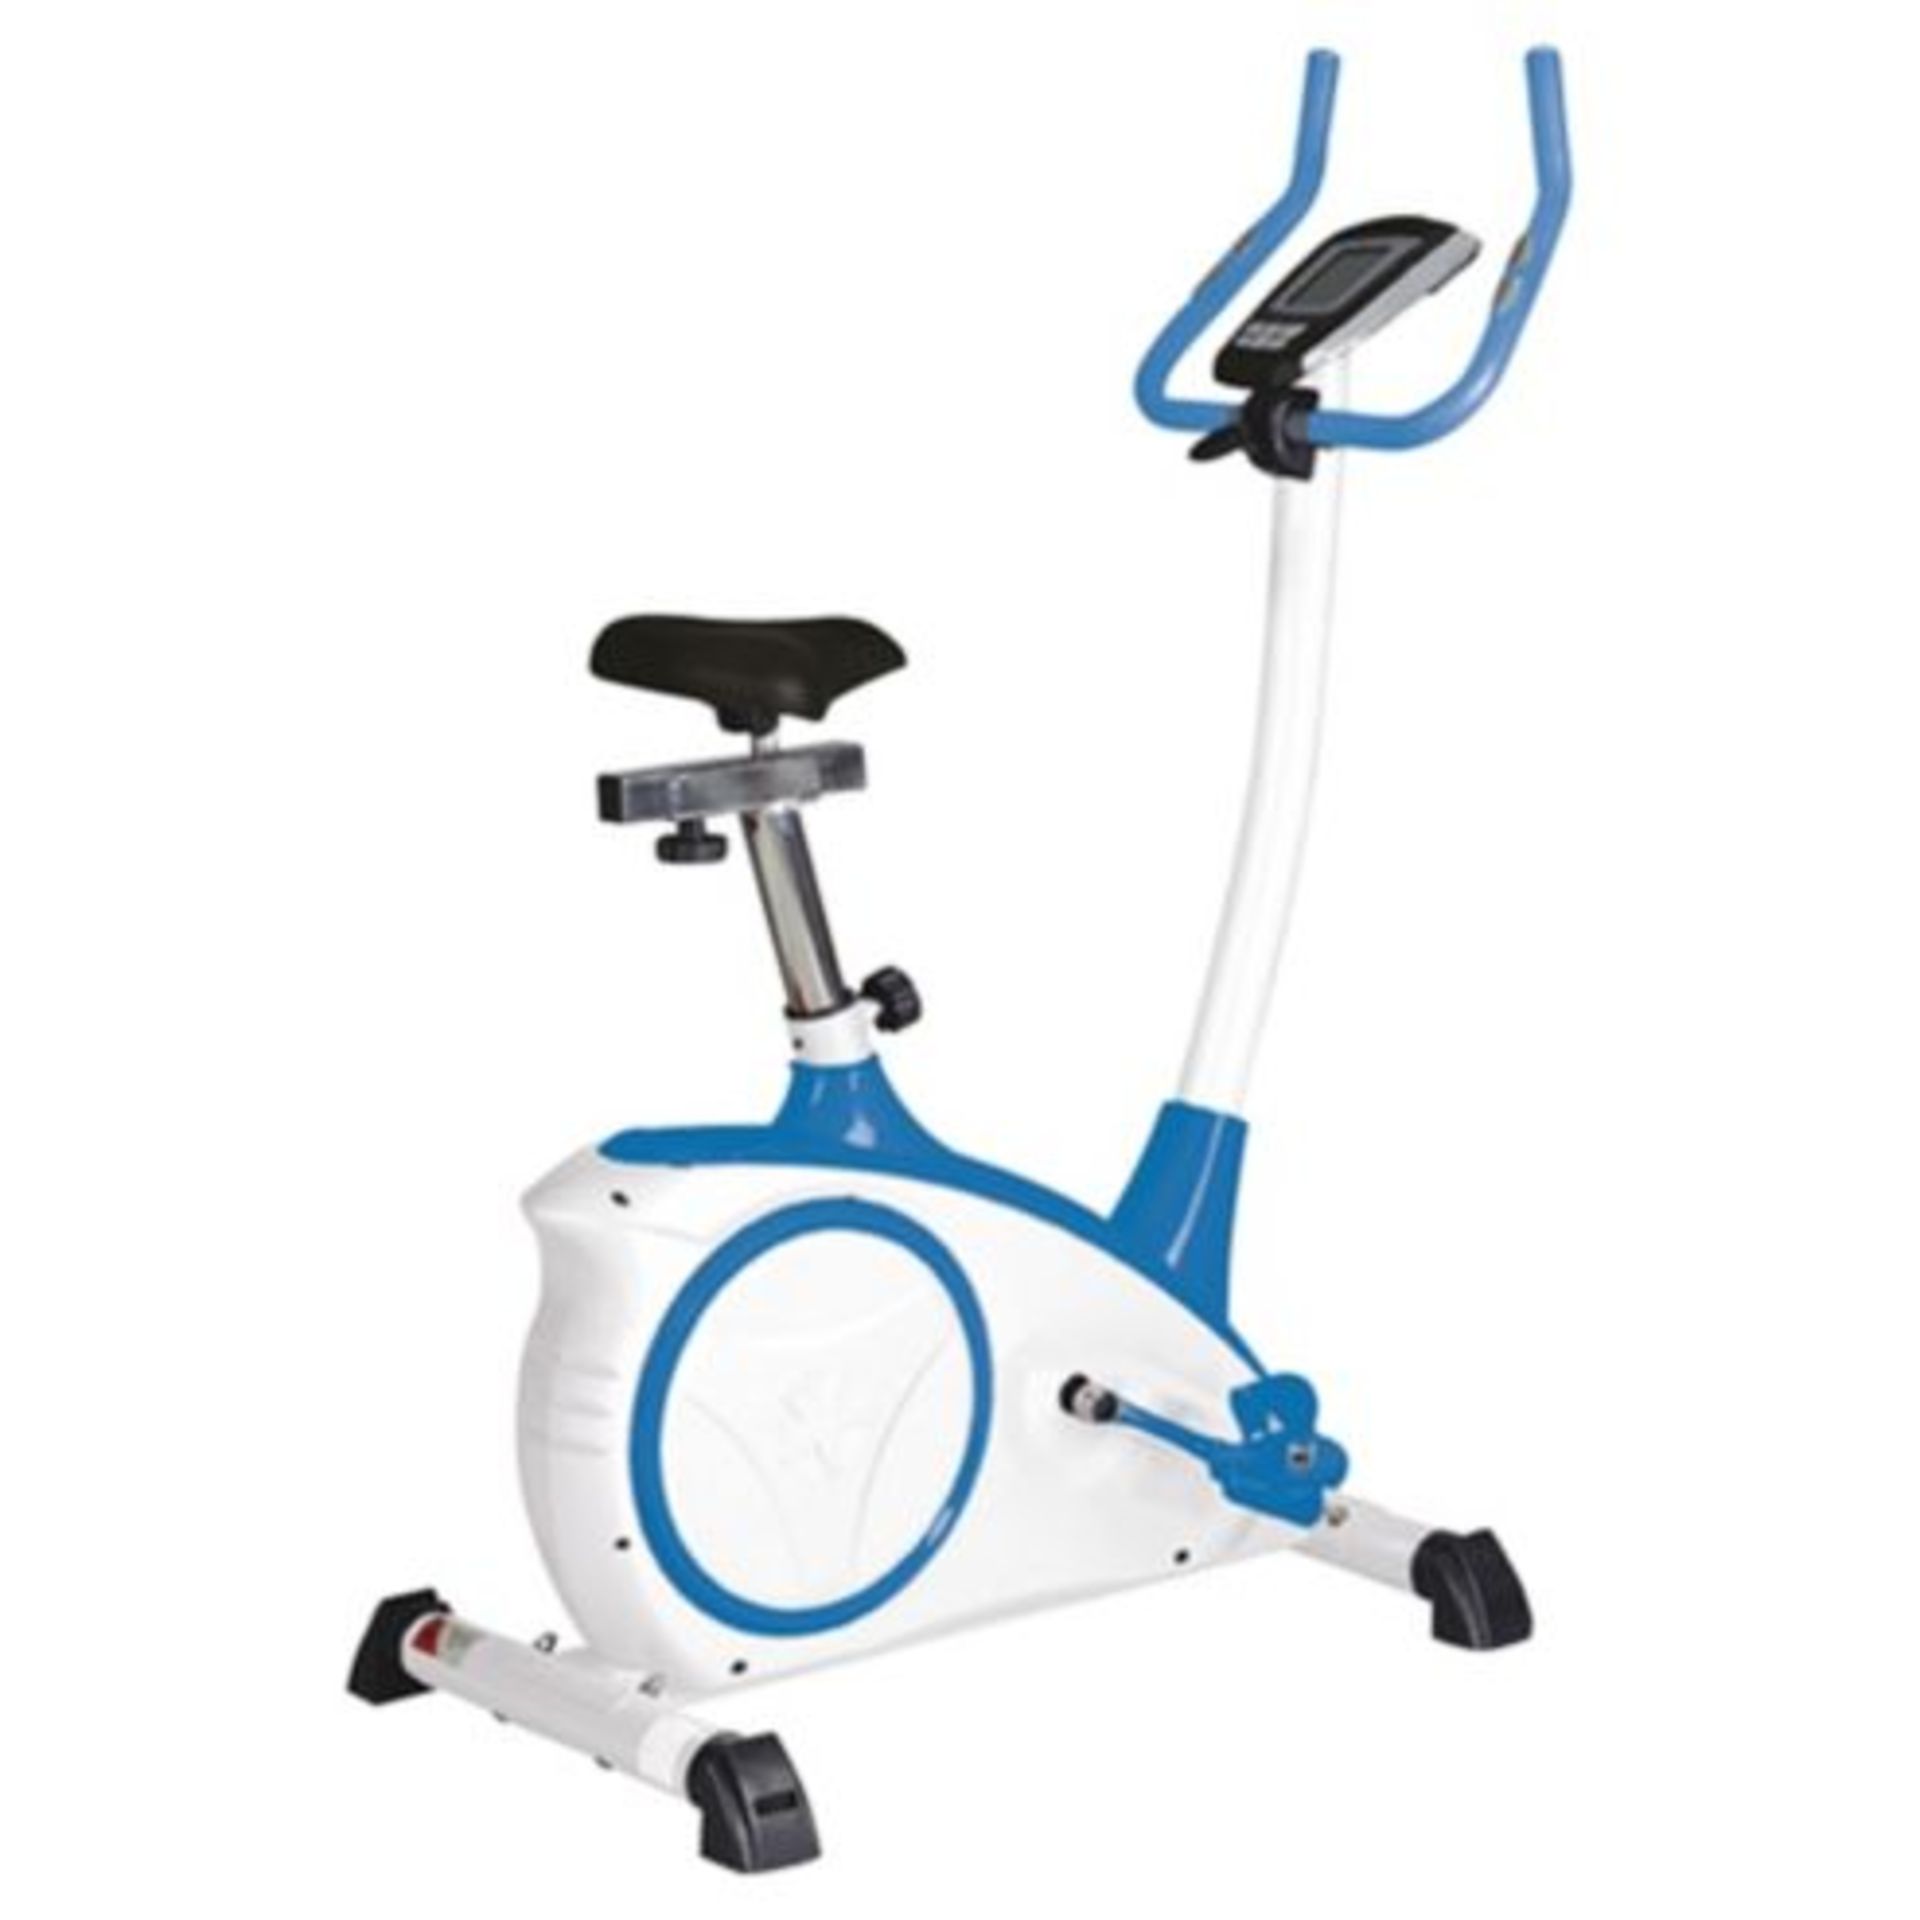 V Brand New Magnetic Exercise Bike With LCD Screen Displaying Heart Rate, Speed, Distance and - Image 3 of 3